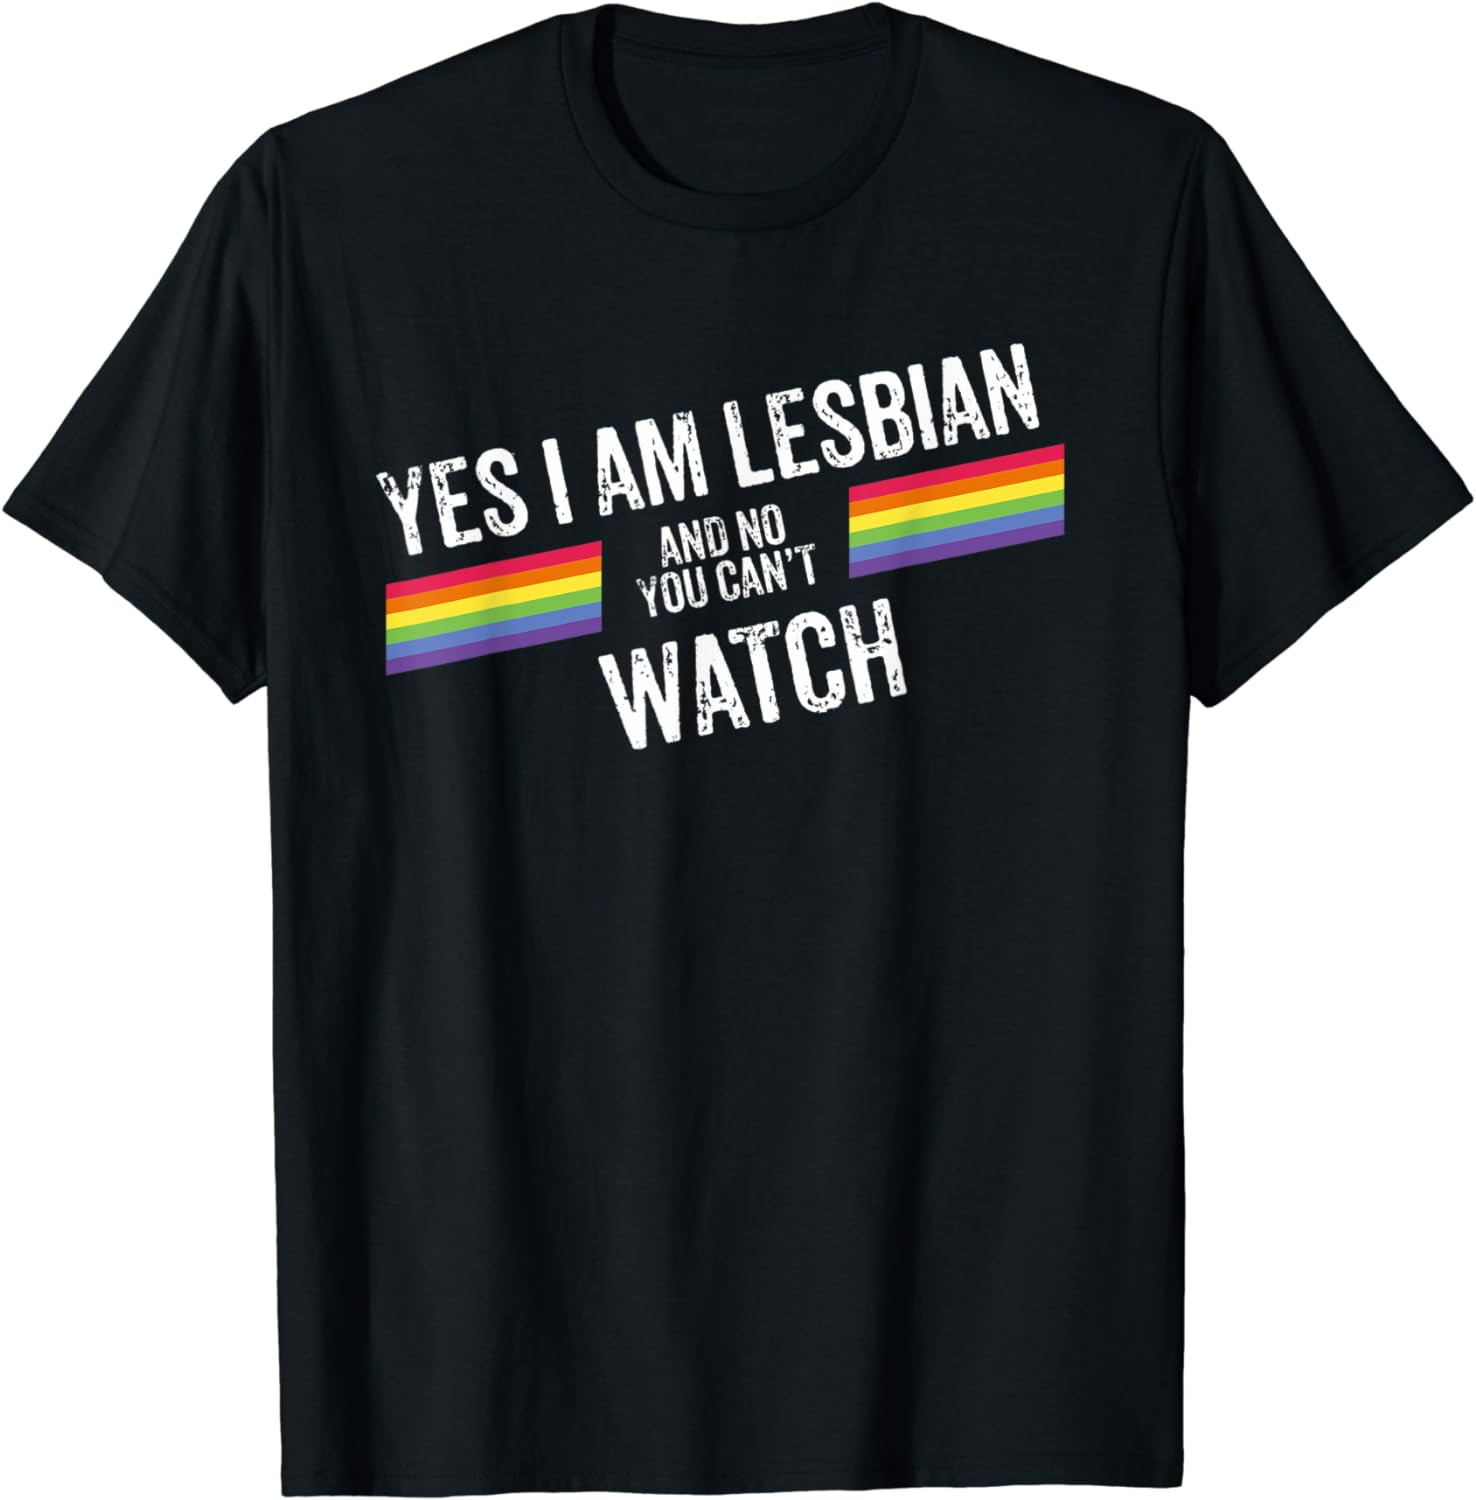 Yes I Am Lesbian And No You Can't Watch Funny Lgbt Gay Gift T-Shirt